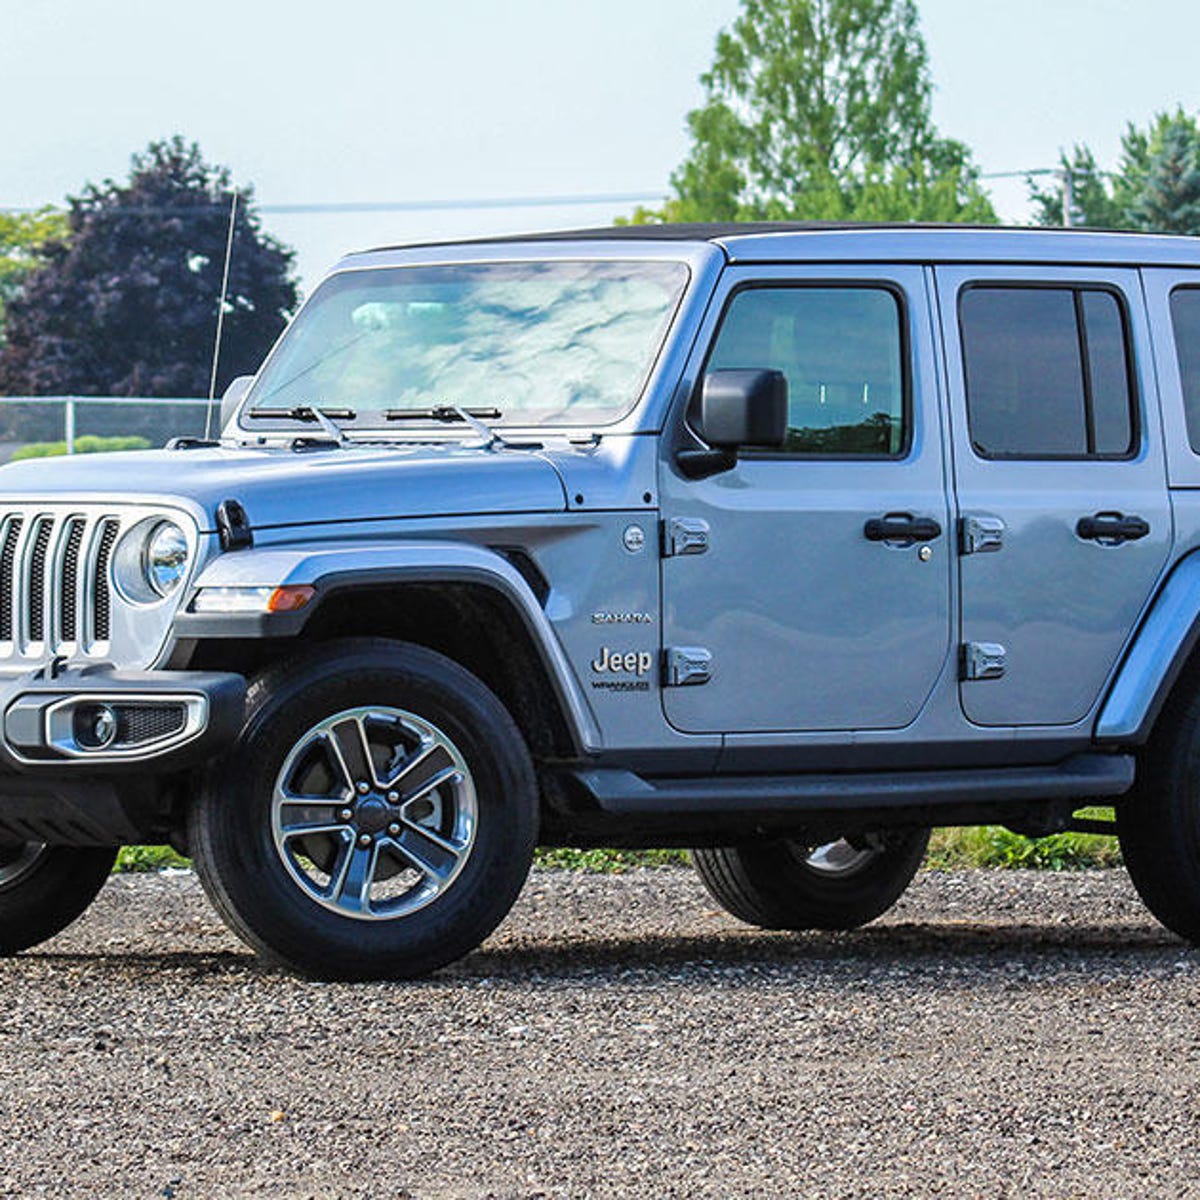 2018 Jeep Wrangler Unlimited review: Grown up in every way - CNET